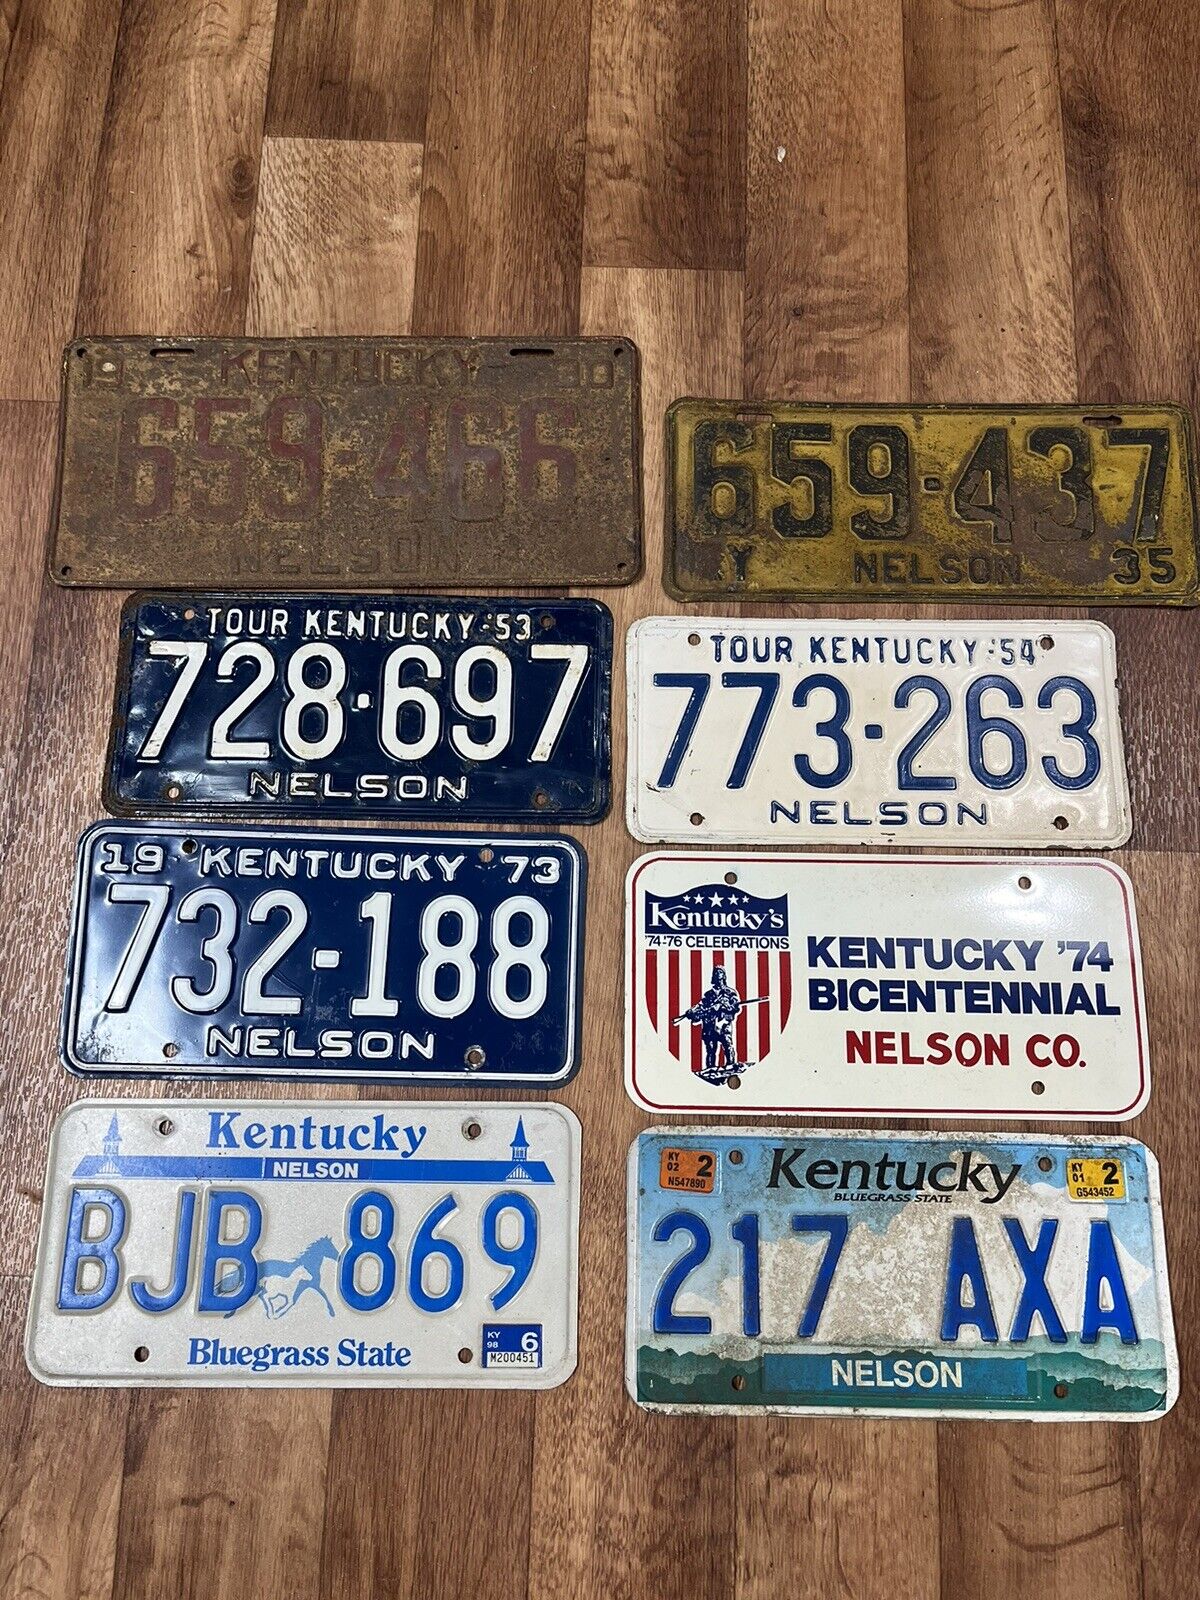 Nelson County Kentucky License Plate Bardstown Vintage 1930 1935 1953 1954 1973